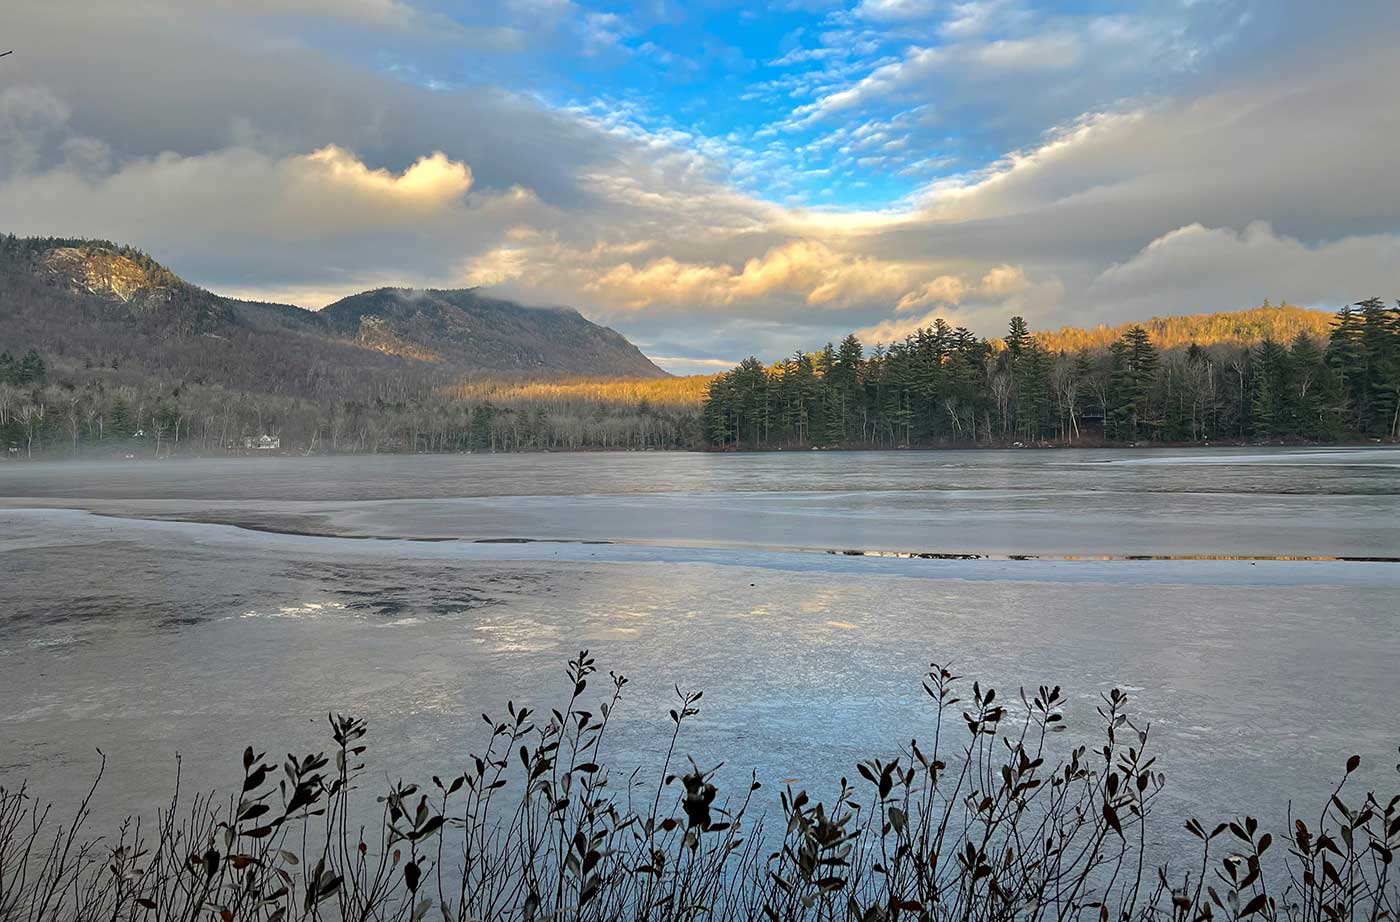 Bald-and-Speckled-Mountains-over-Shagg-Pond-Woodstock-David-Preston